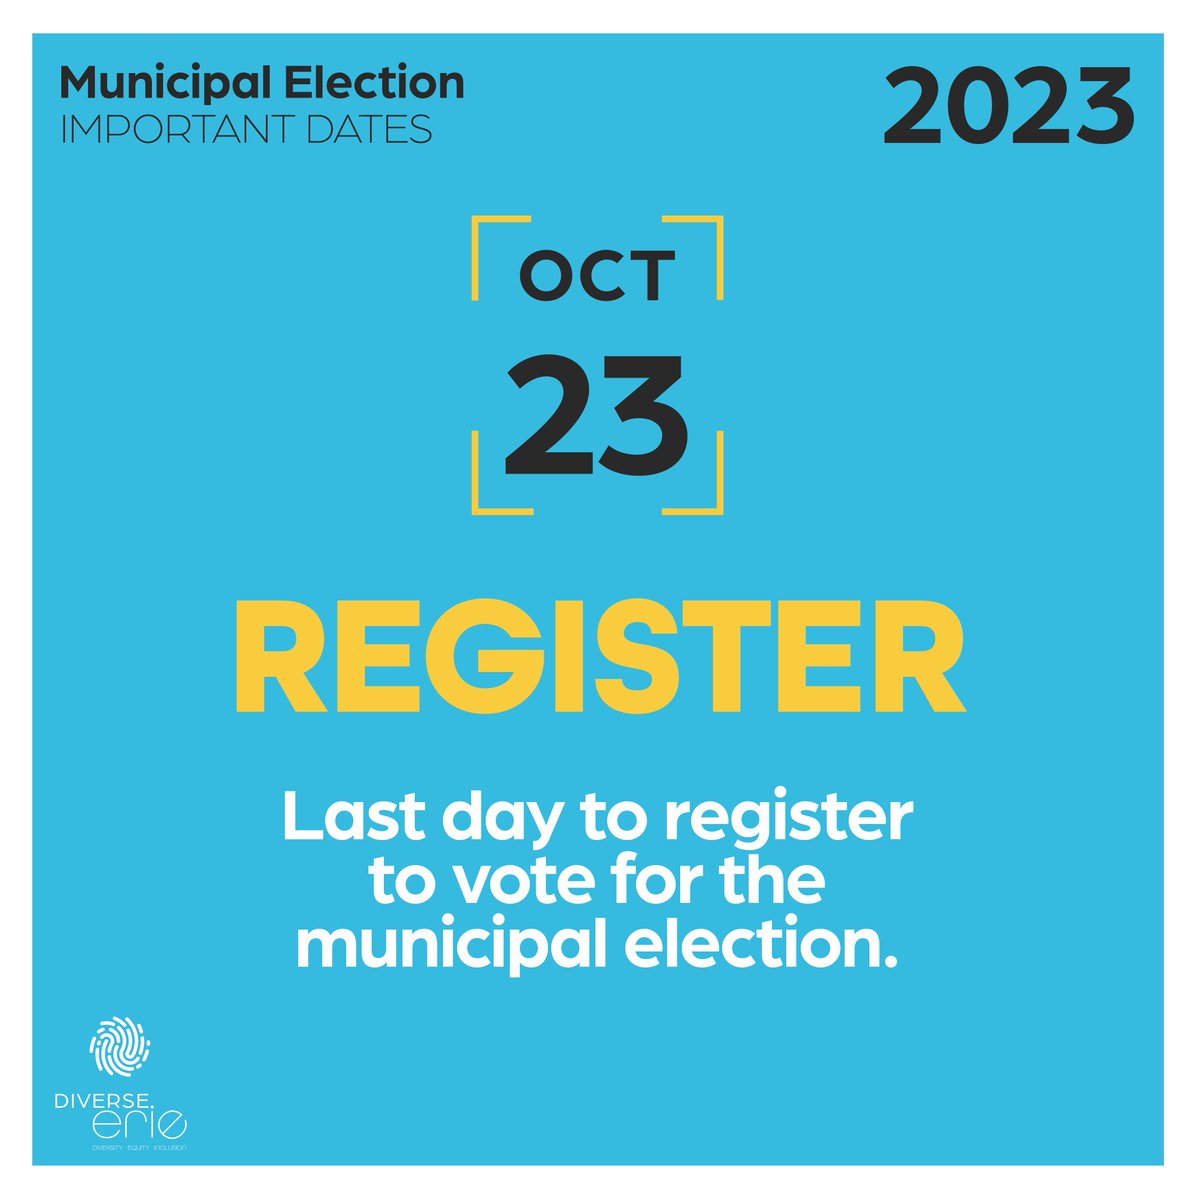 TODAY IS THE LAST DAY to make sure you're #VoteReady and registered for the November 7th #municipalelection.

Register or update your voter registration here: vote.pa.gov/register.